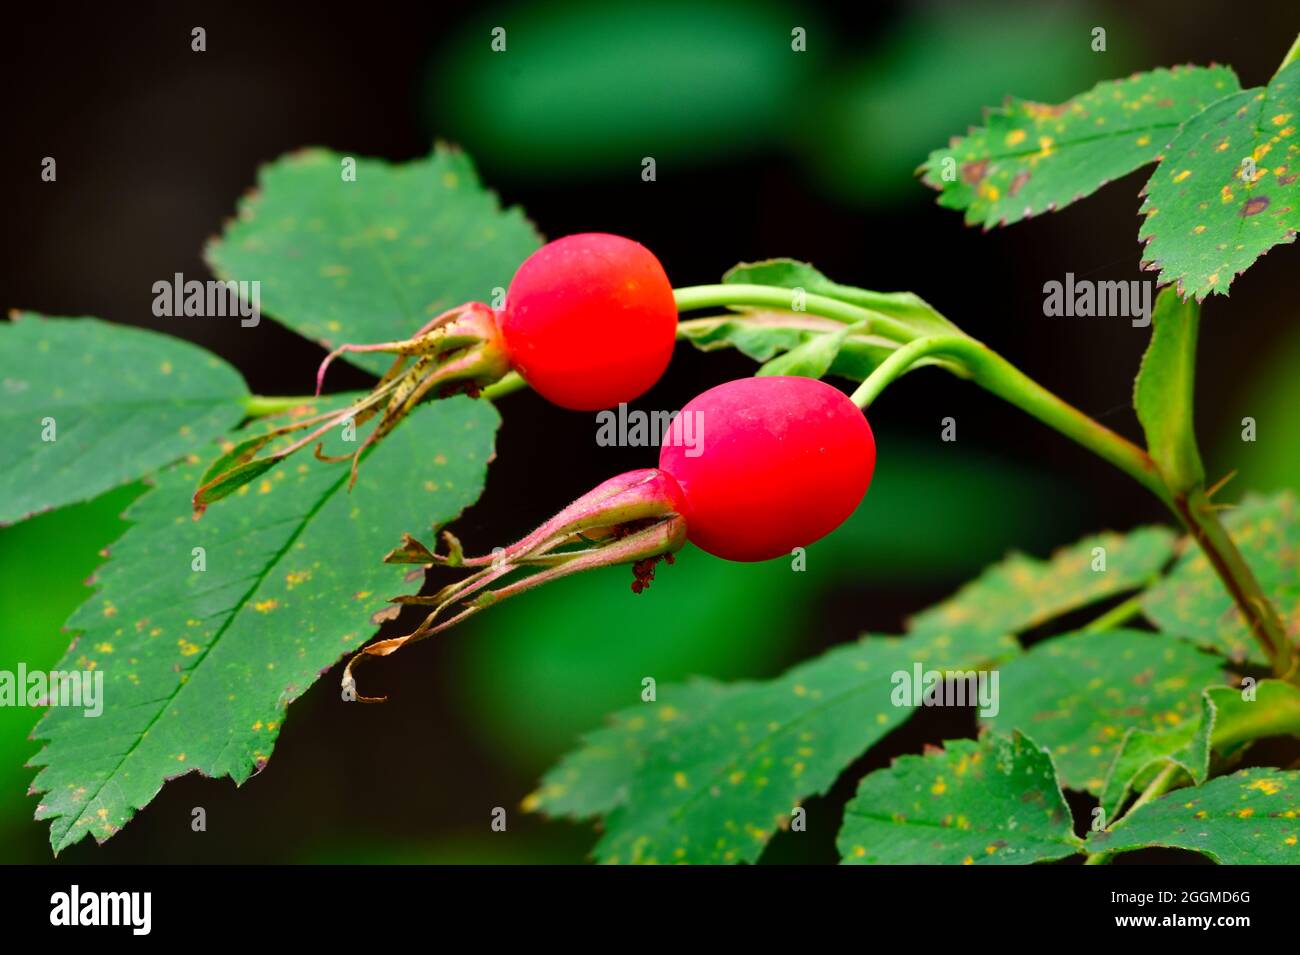 A landscape image of wild rose hips 'Rosa acicularis', plants growing in rural Alberta Canada Stock Photo